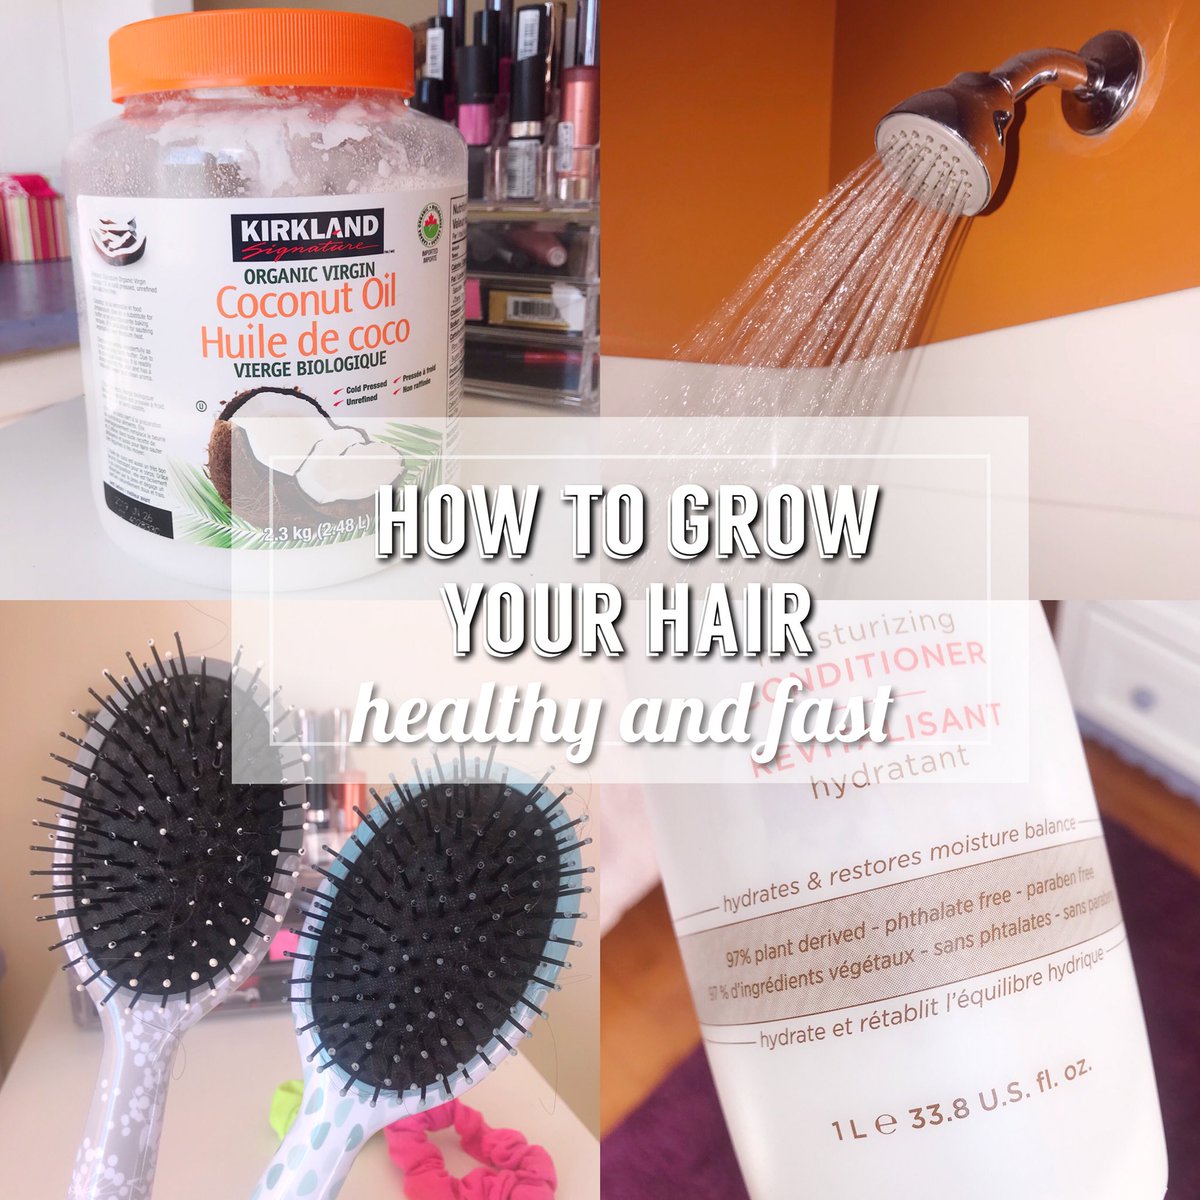 happy October! Posted a blog post yesterday about how to grow your hair, so please check it out if you have not already! 💕
-
batoolagiel.wordpress.com
-
#BloggerBabesRT #bloggerstribe #TheClqRT #thebloggingtribe @allthoseblogs @BloggerHQ #bloggerloveshare